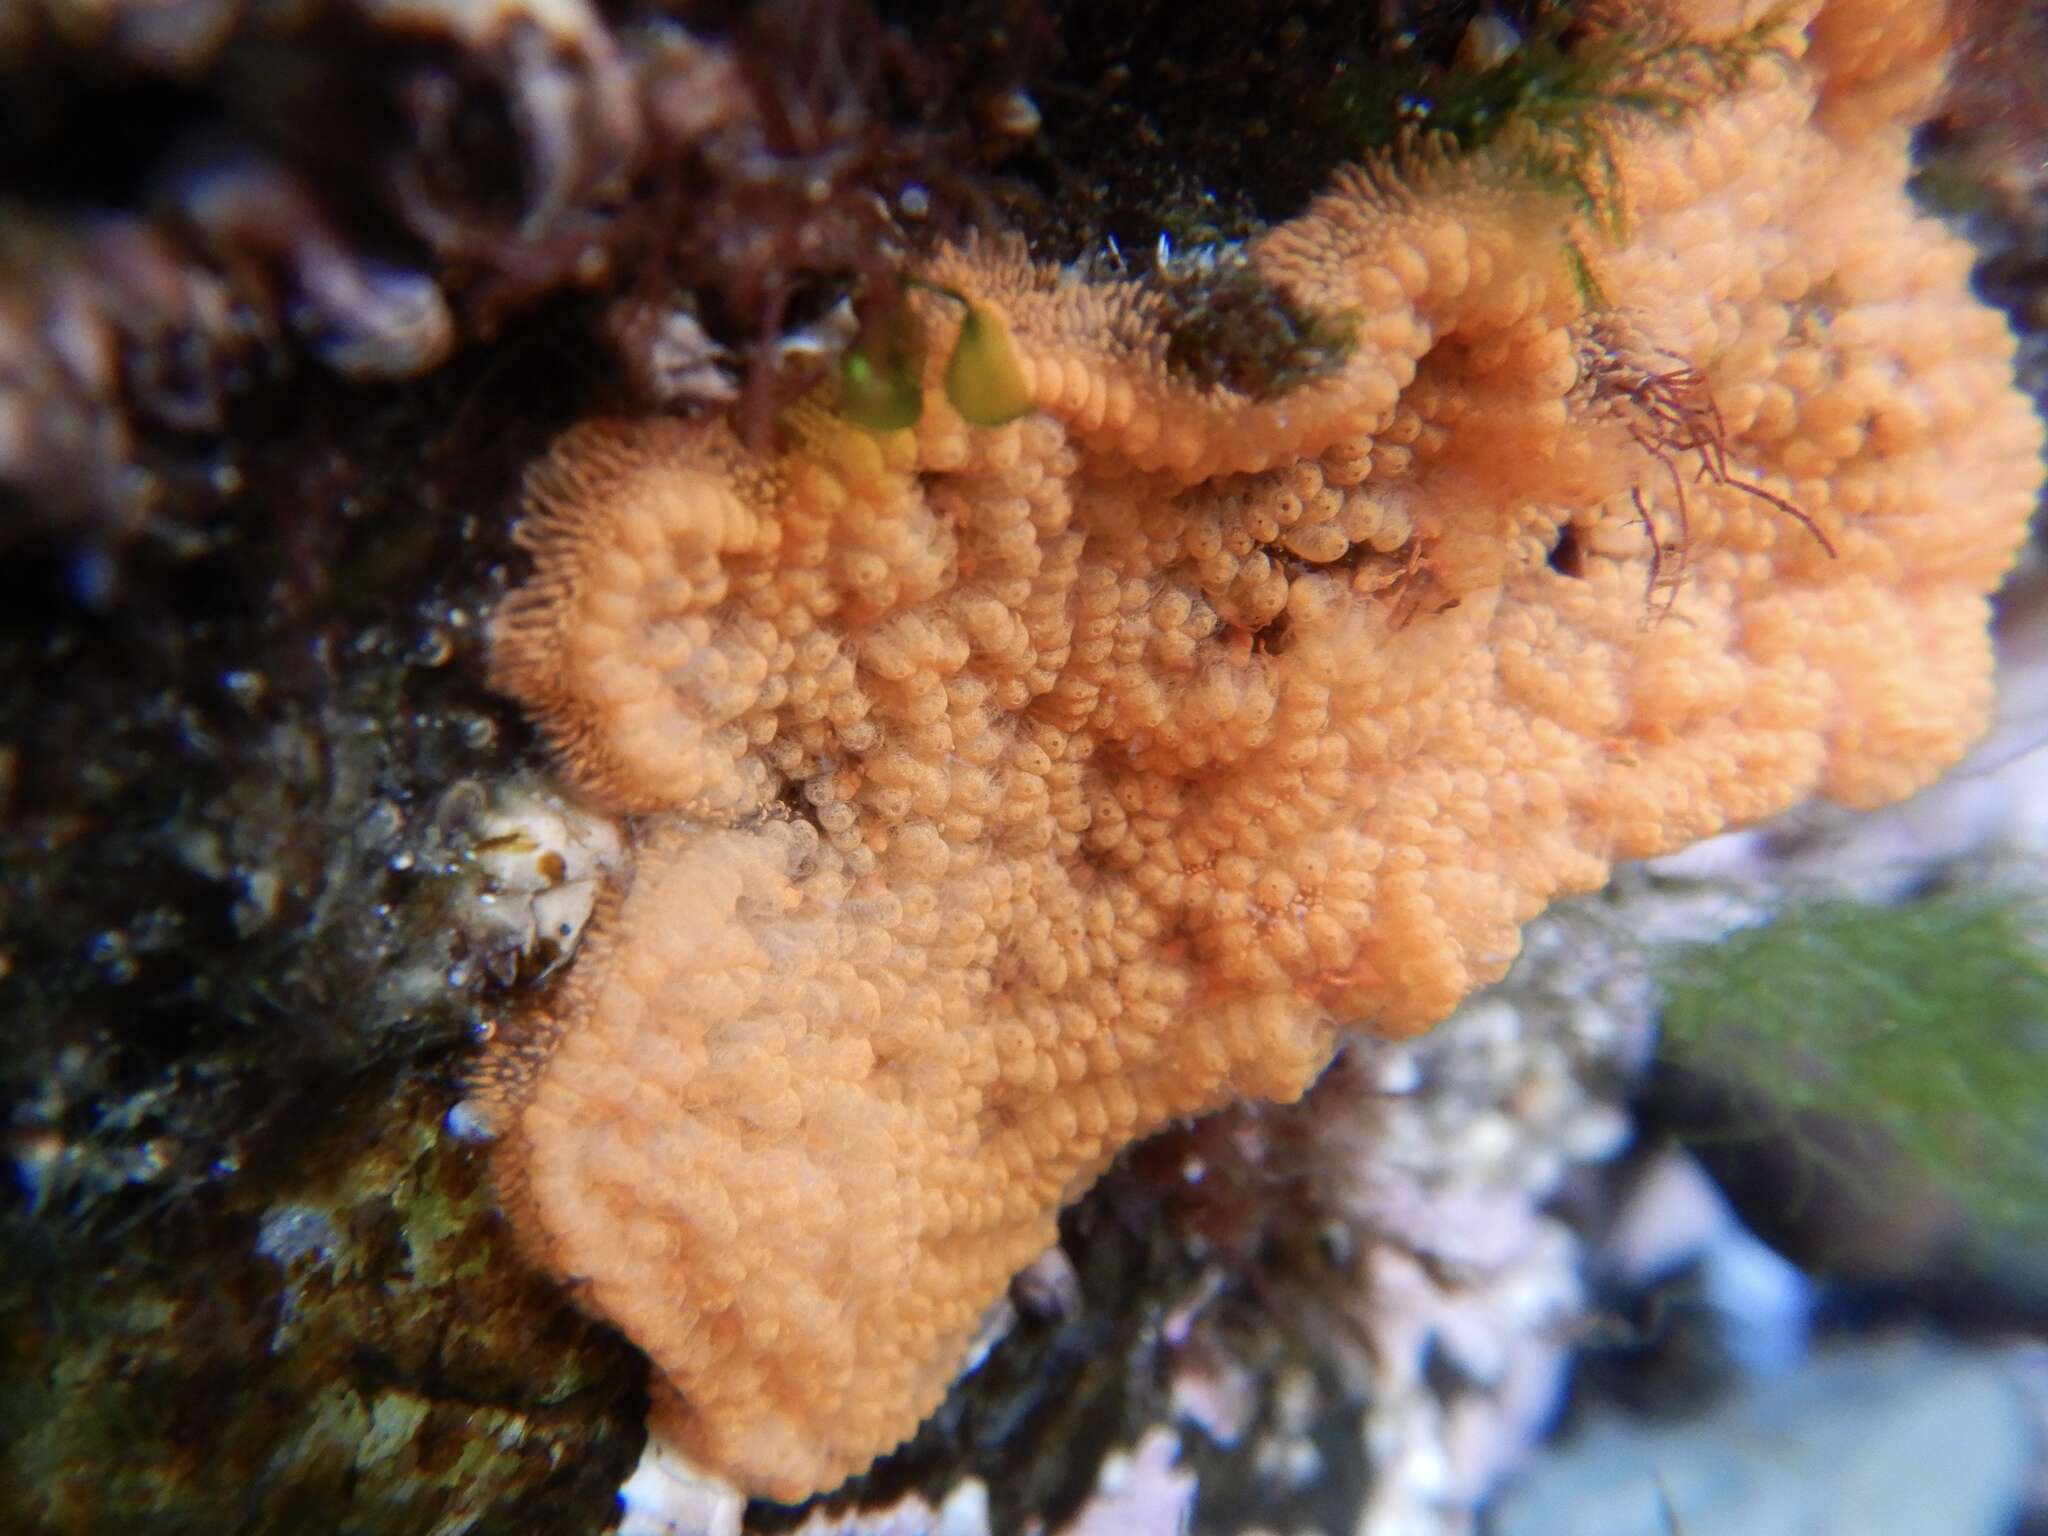 Image of Colonial tunicate